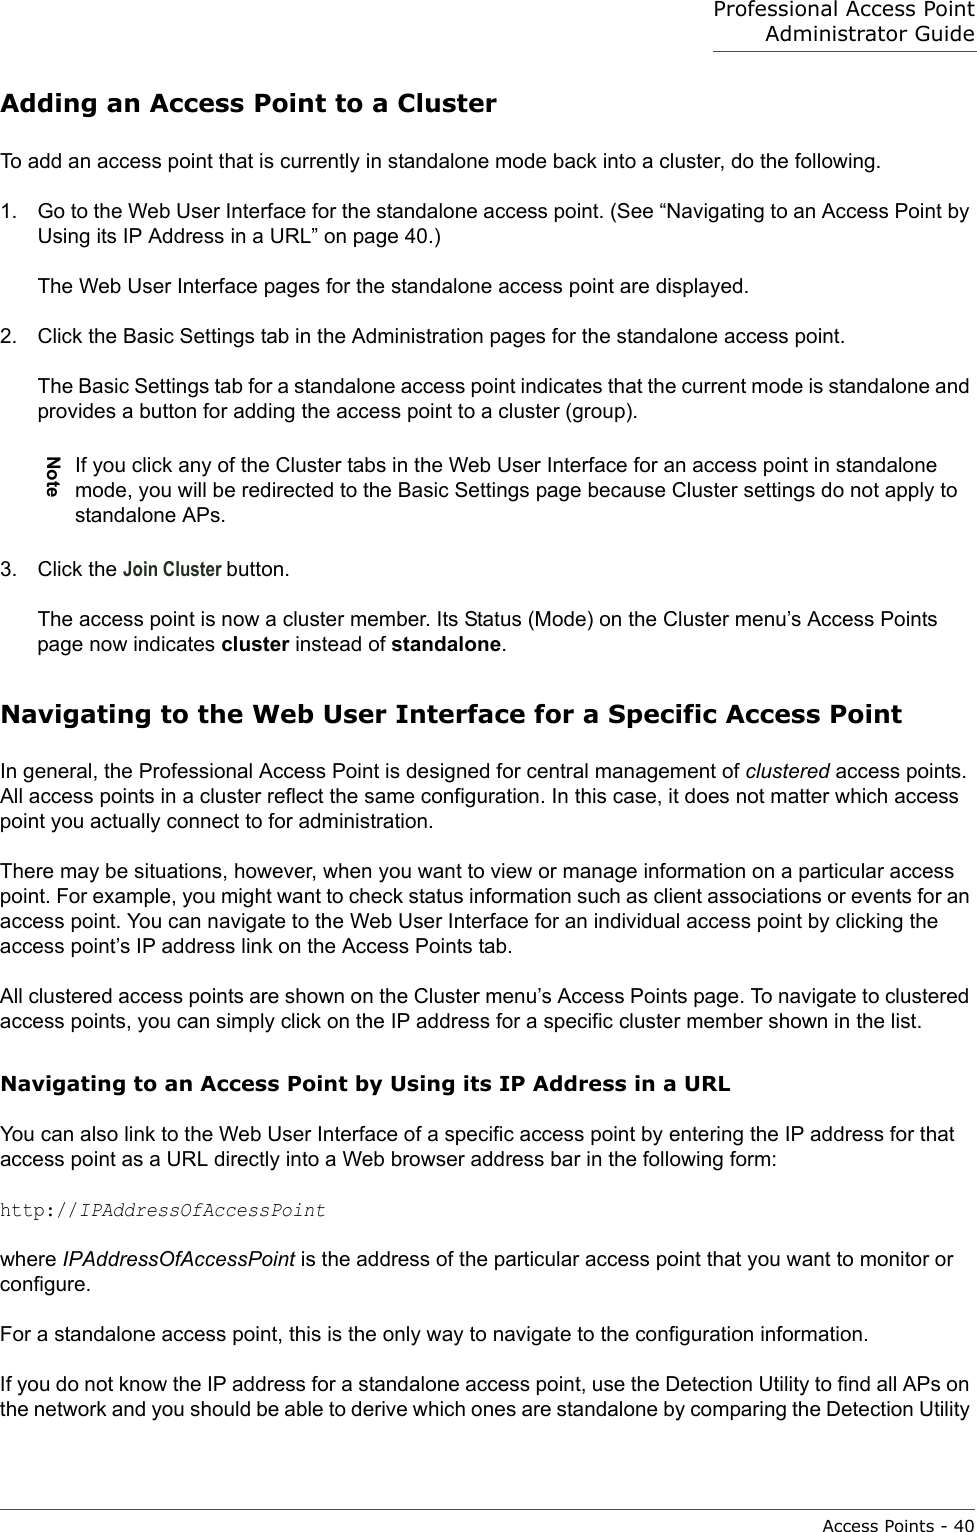 Professional Access Point Administrator GuideAccess Points - 40Adding an Access Point to a ClusterTo add an access point that is currently in standalone mode back into a cluster, do the following.1. Go to the Web User Interface for the standalone access point. (See “Navigating to an Access Point by Using its IP Address in a URL” on page 40.)The Web User Interface pages for the standalone access point are displayed.2. Click the Basic Settings tab in the Administration pages for the standalone access point.The Basic Settings tab for a standalone access point indicates that the current mode is standalone and provides a button for adding the access point to a cluster (group).3. Click the Join Cluster button.The access point is now a cluster member. Its Status (Mode) on the Cluster menu’s Access Points page now indicates cluster instead of standalone.Navigating to the Web User Interface for a Specific Access PointIn general, the Professional Access Point is designed for central management of clustered access points. All access points in a cluster reflect the same configuration. In this case, it does not matter which access point you actually connect to for administration.There may be situations, however, when you want to view or manage information on a particular access point. For example, you might want to check status information such as client associations or events for an access point. You can navigate to the Web User Interface for an individual access point by clicking the access point’s IP address link on the Access Points tab.All clustered access points are shown on the Cluster menu’s Access Points page. To navigate to clustered access points, you can simply click on the IP address for a specific cluster member shown in the list.Navigating to an Access Point by Using its IP Address in a URLYou can also link to the Web User Interface of a specific access point by entering the IP address for that access point as a URL directly into a Web browser address bar in the following form:http://IPAddressOfAccessPointwhere IPAddressOfAccessPoint is the address of the particular access point that you want to monitor or configure.For a standalone access point, this is the only way to navigate to the configuration information.If you do not know the IP address for a standalone access point, use the Detection Utility to find all APs on the network and you should be able to derive which ones are standalone by comparing the Detection Utility NoteIf you click any of the Cluster tabs in the Web User Interface for an access point in standalone mode, you will be redirected to the Basic Settings page because Cluster settings do not apply to standalone APs.